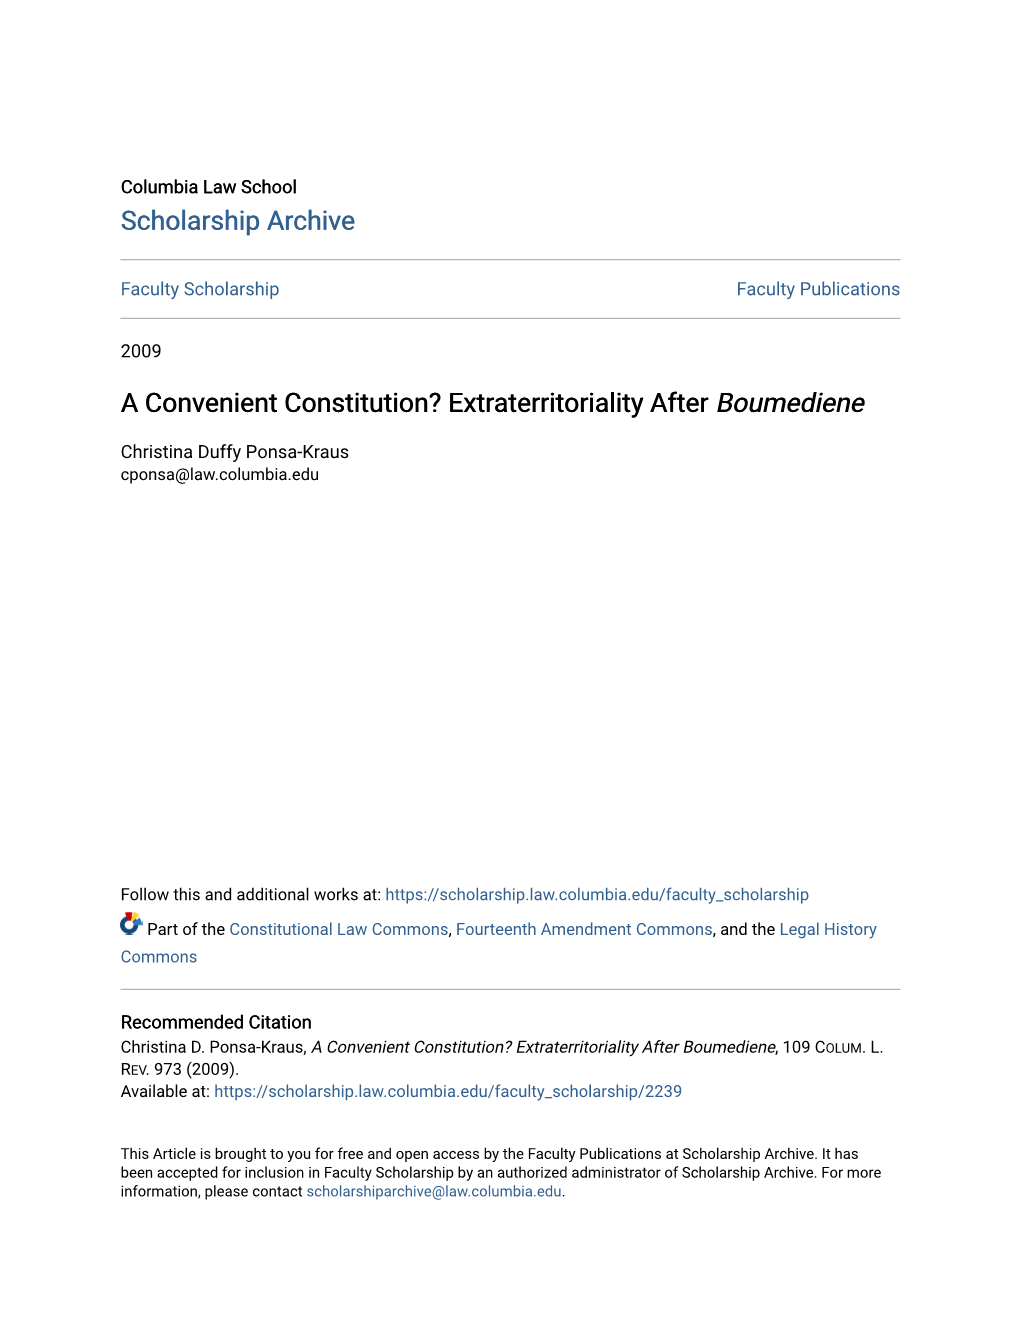 A Convenient Constitution? Extraterritoriality After Boumediene